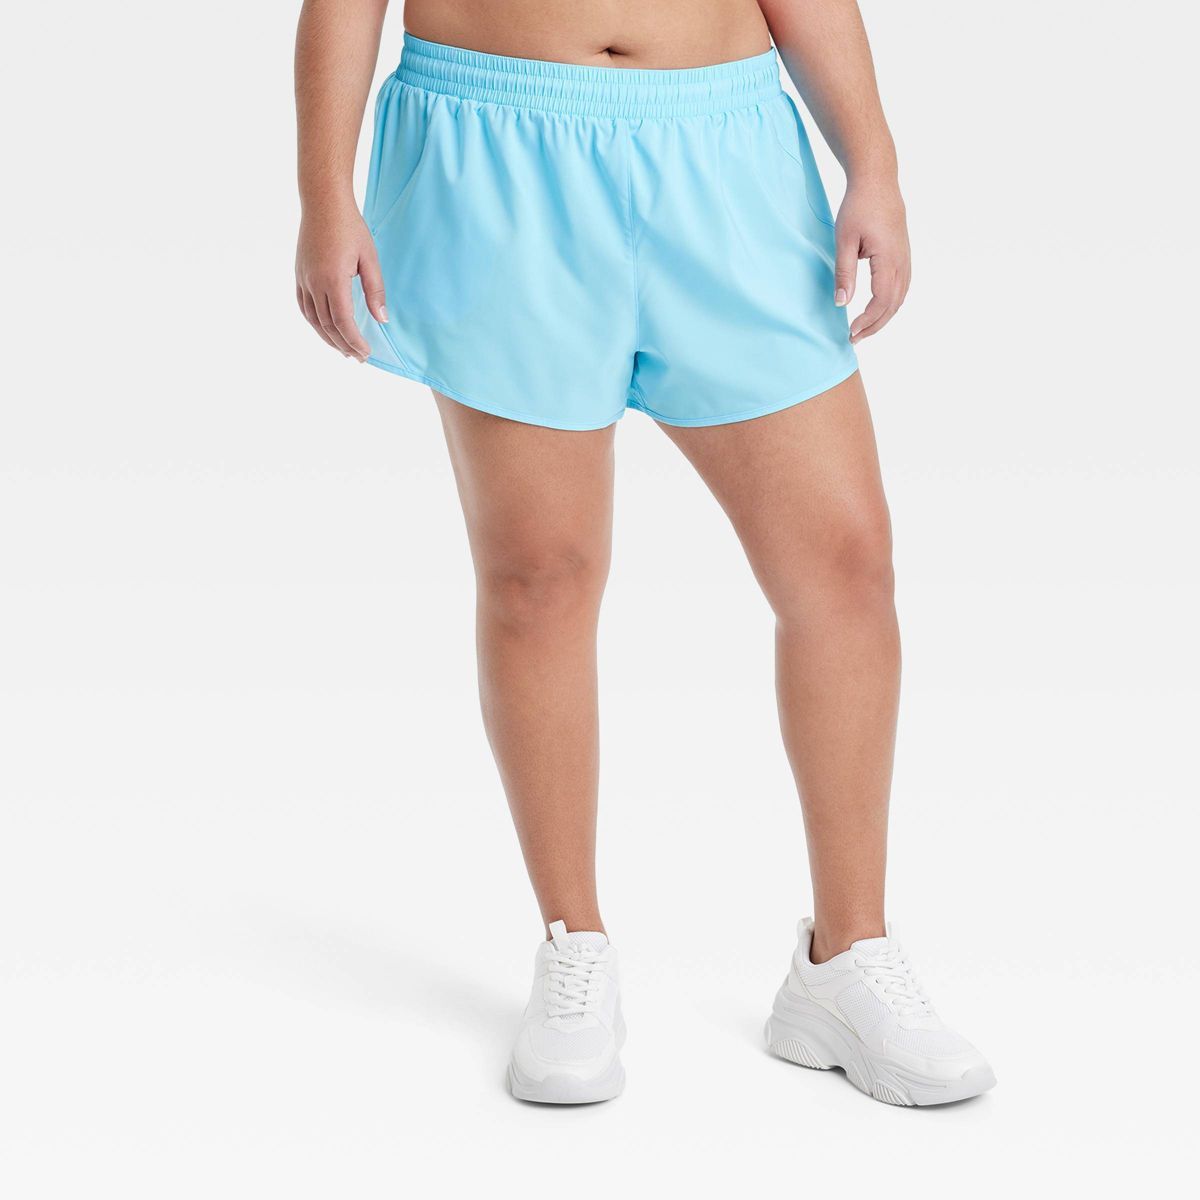 Women's Woven Mid-Rise Run Shorts 3" - All In Motion™ | Target